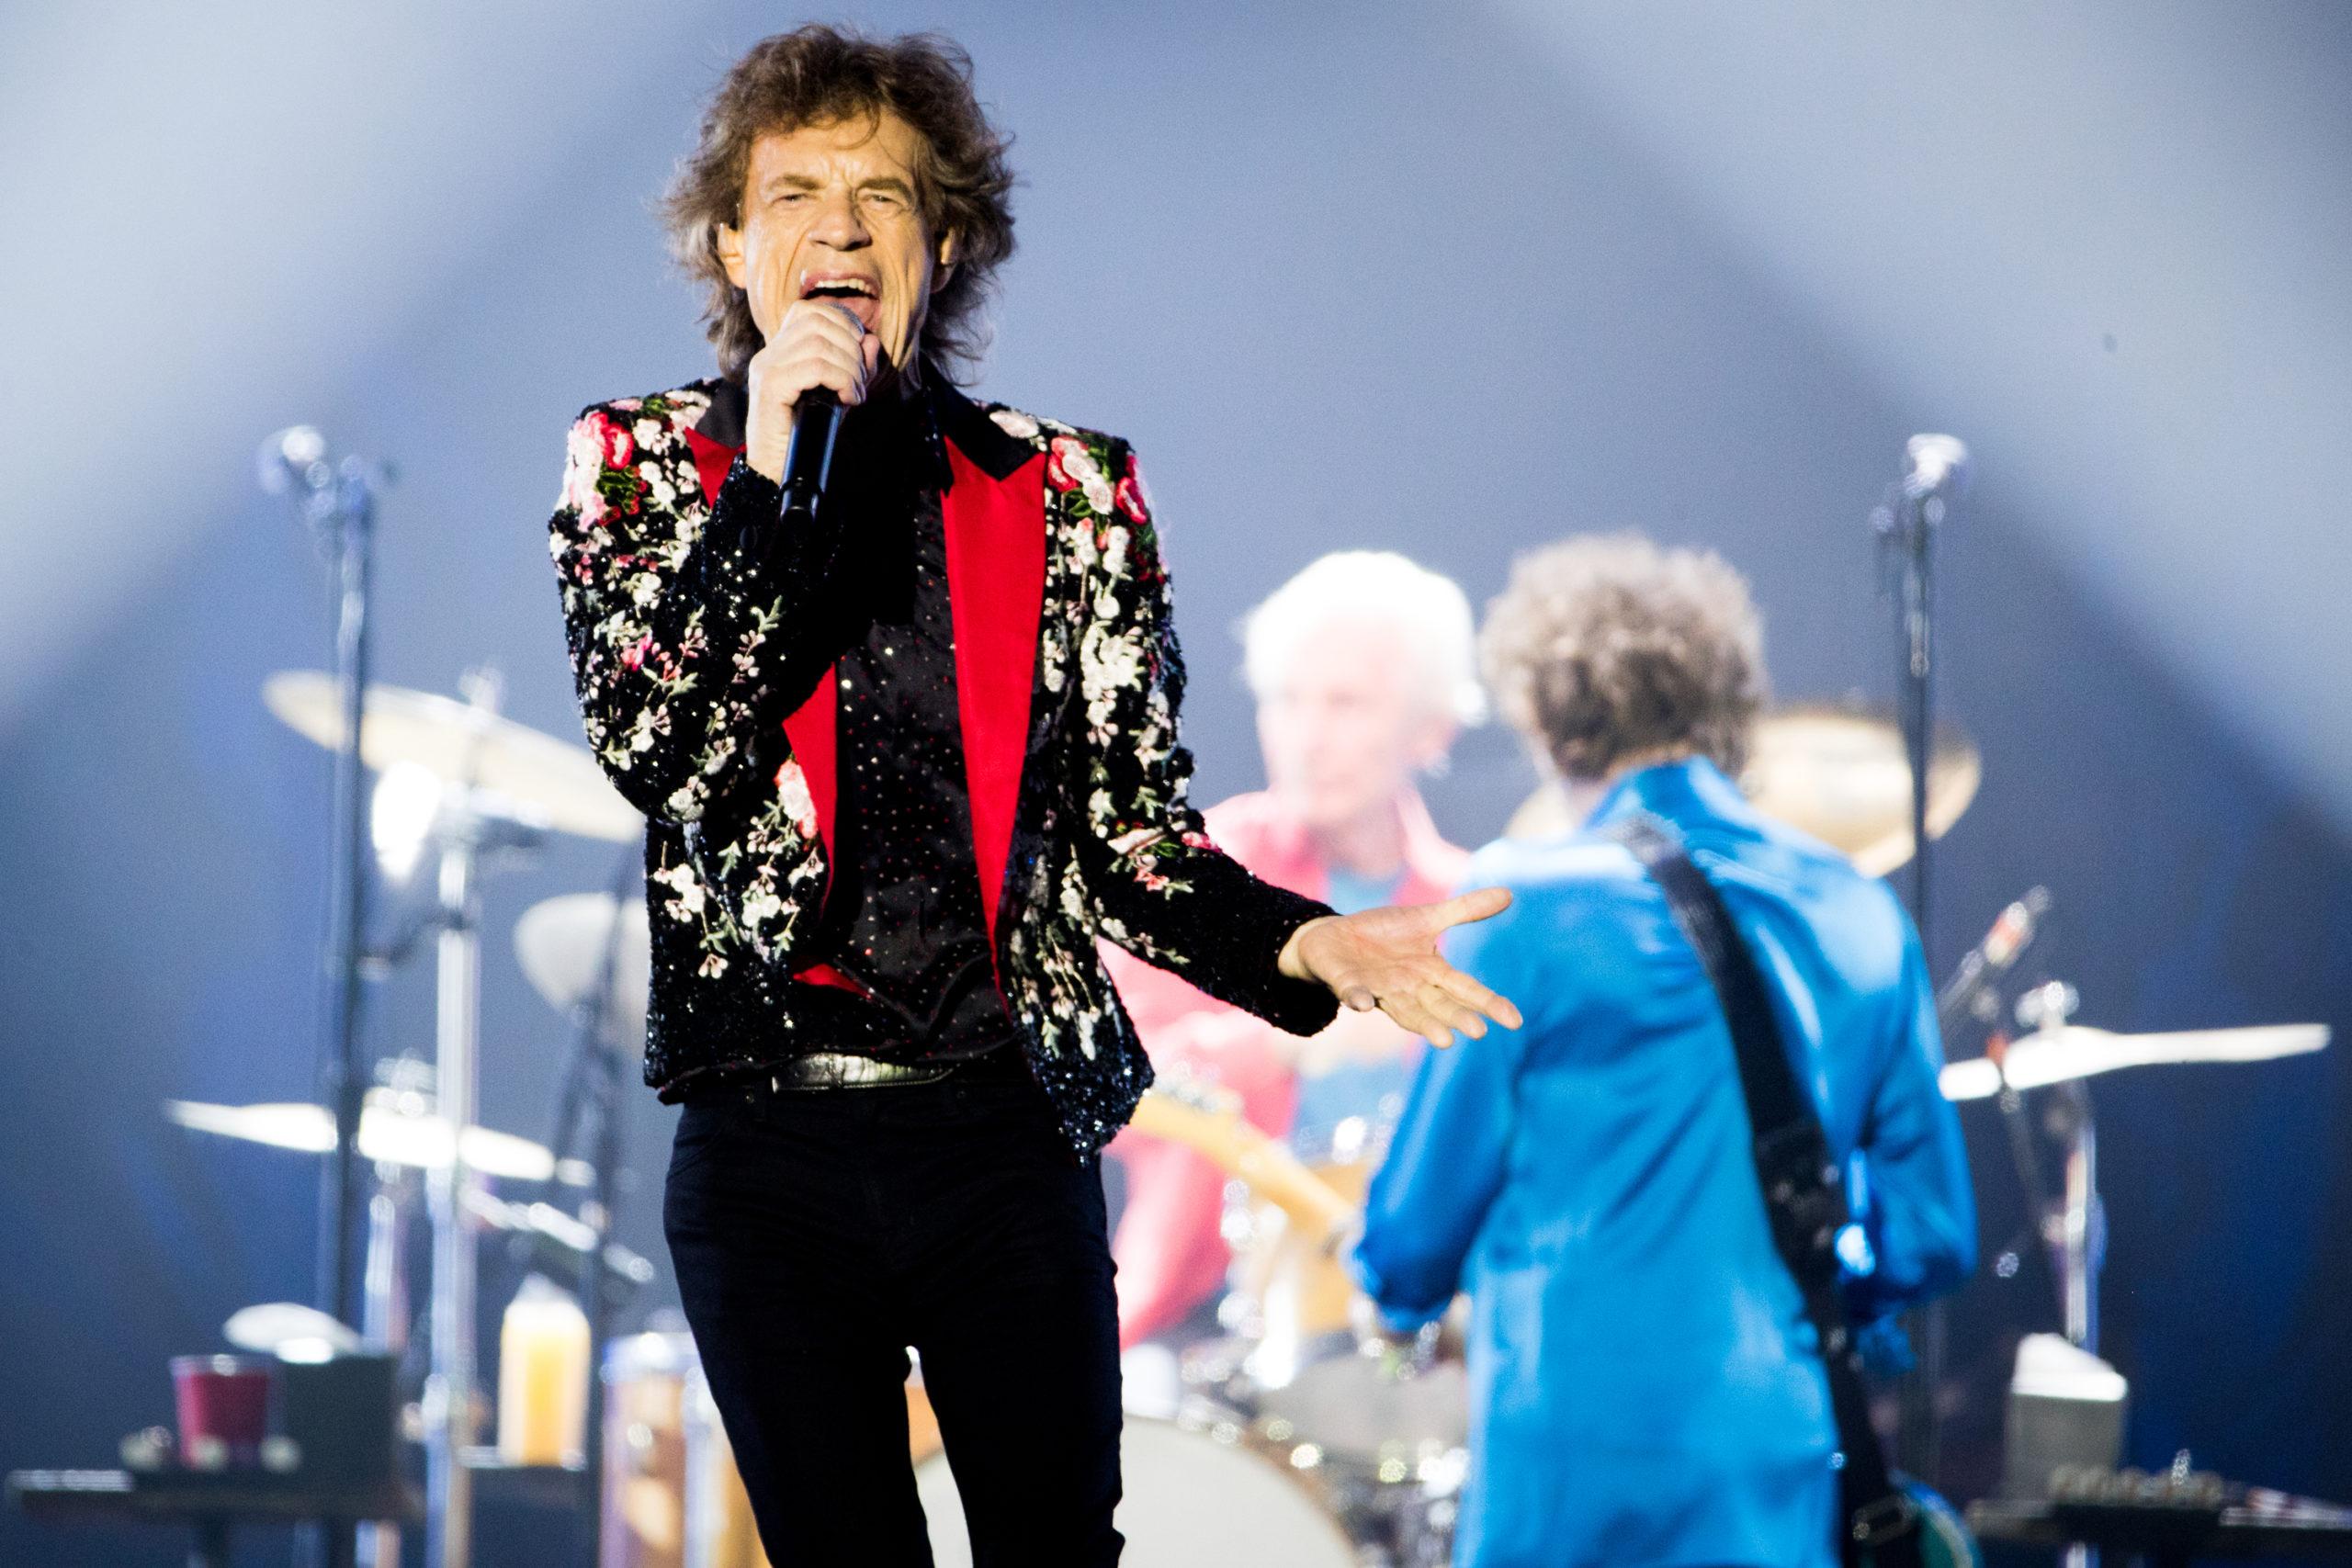 The Rolling Stones announce 'No Filter' 2020 North American tour